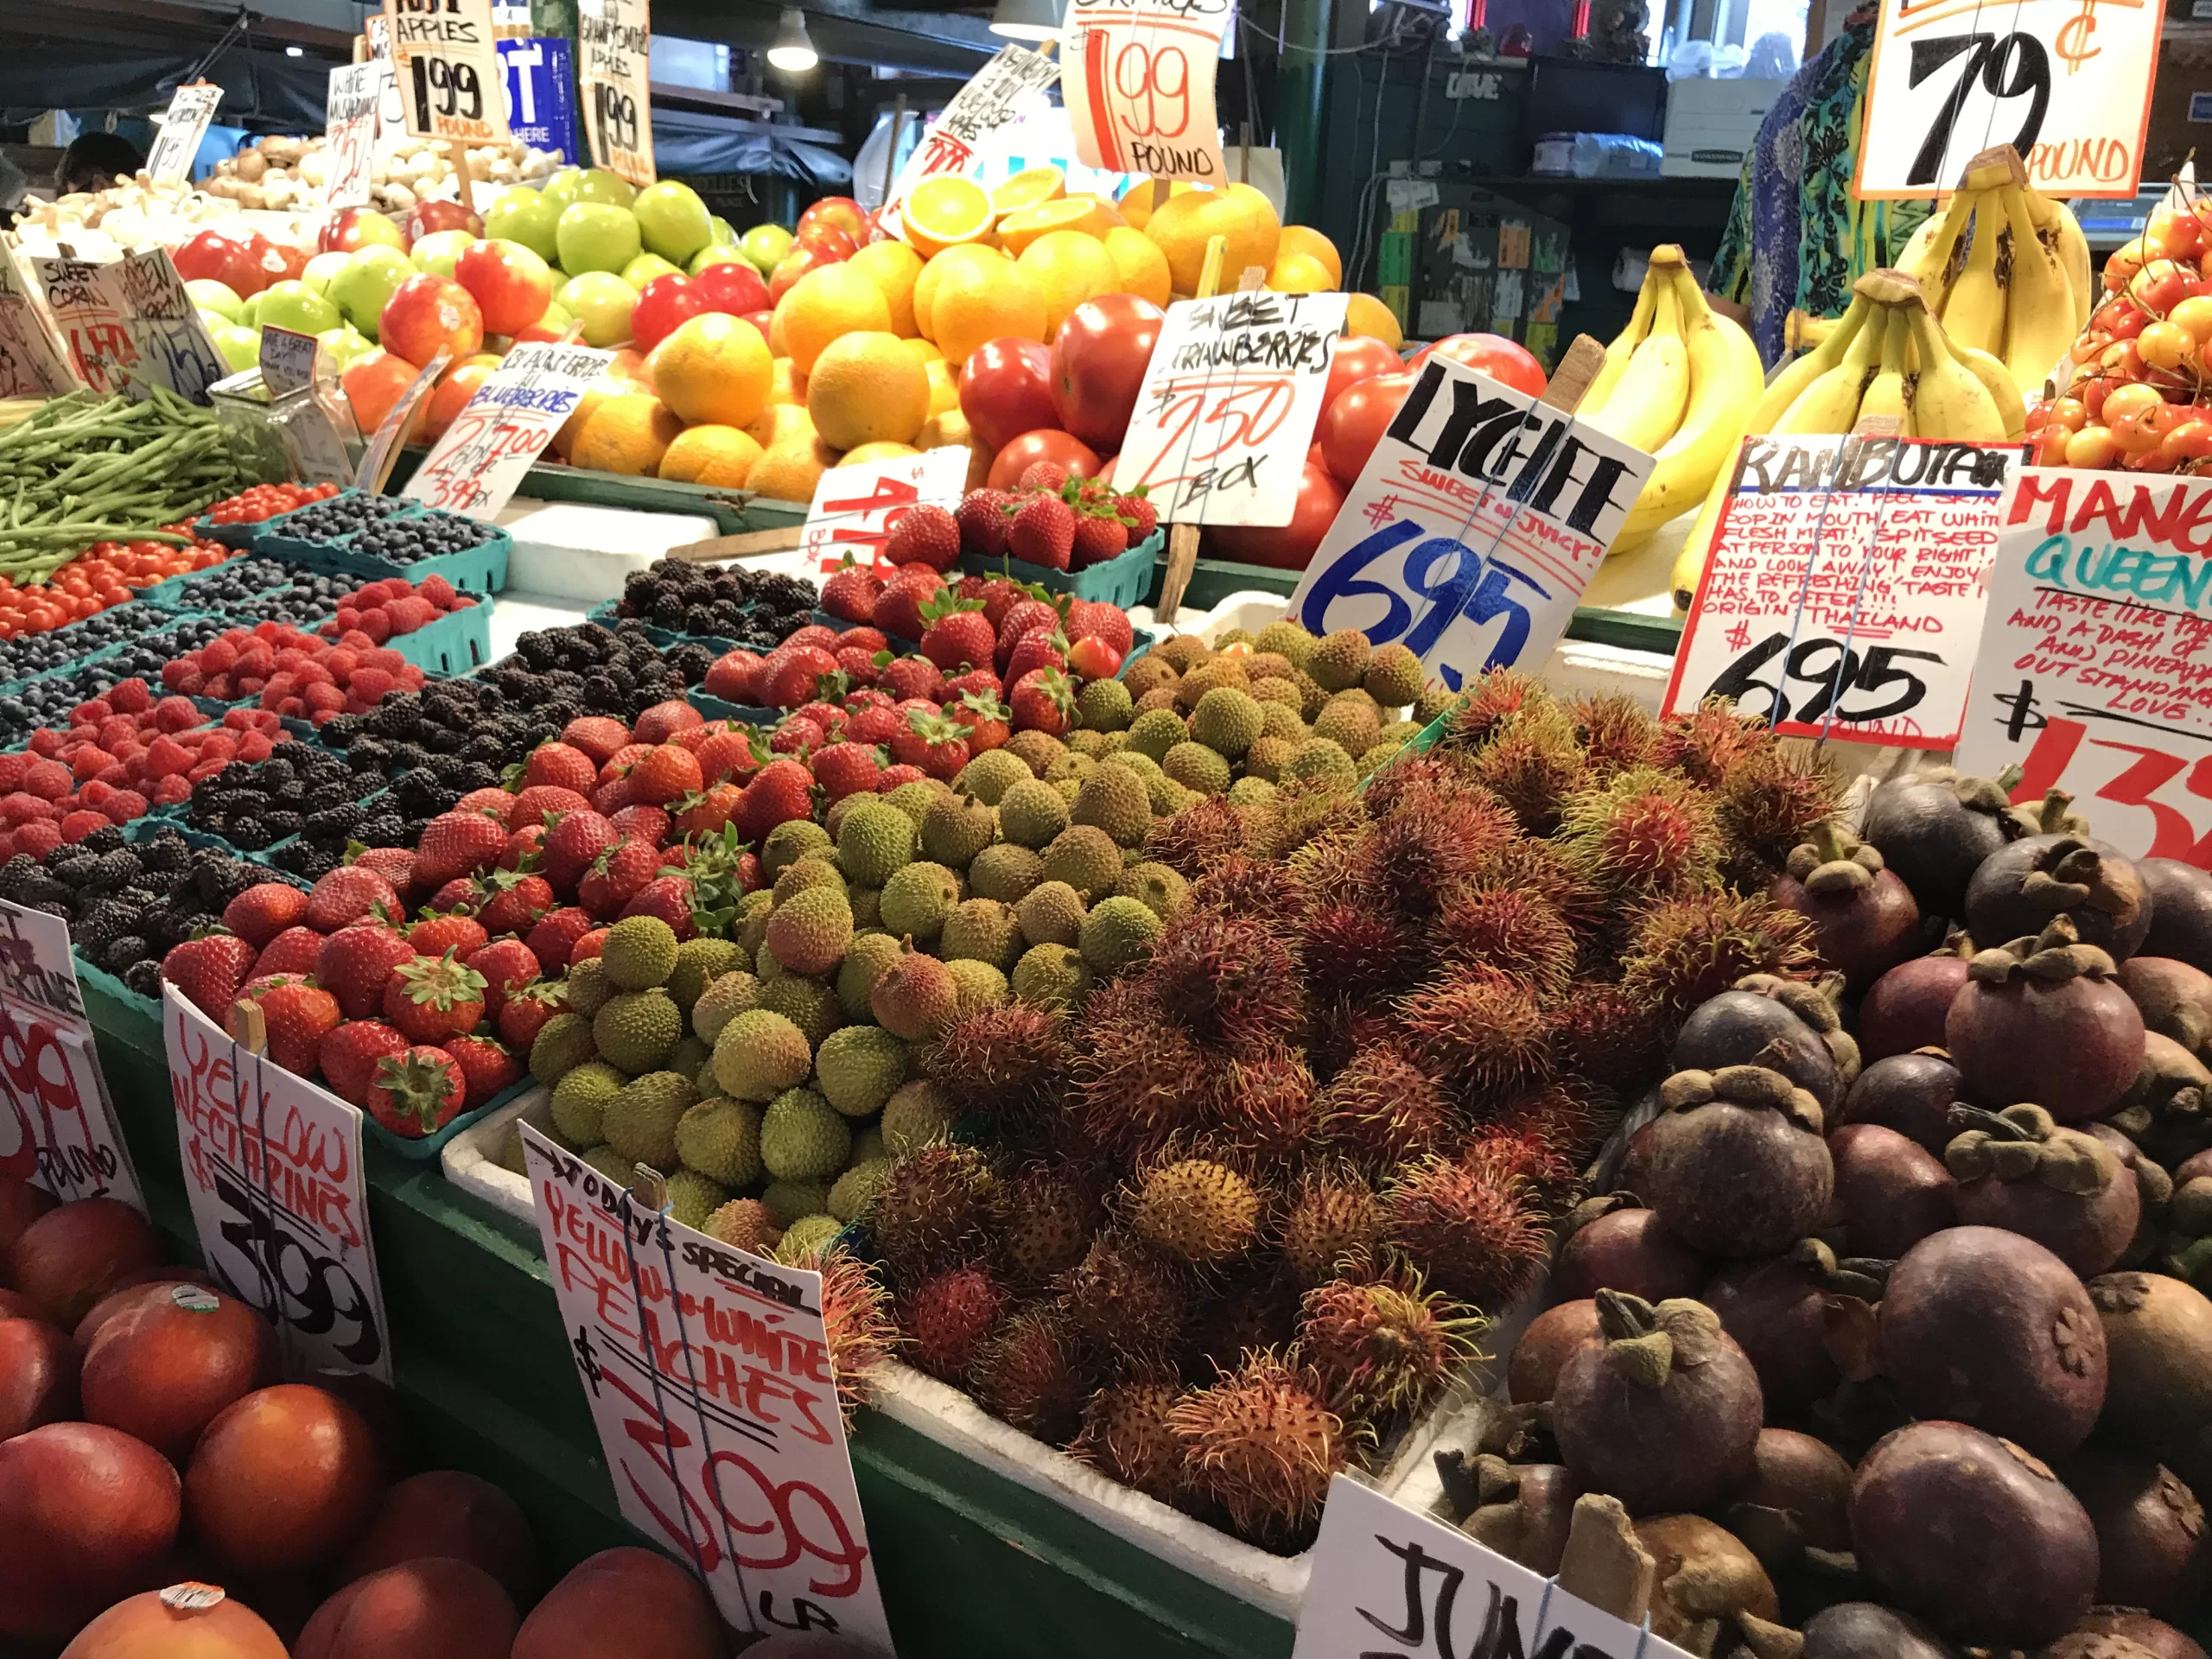 A colorful fruit stand inside Pike Place Market in Seattle, Washington featuring various berry and apple varieties, bananas, nectarines, and rambutan. =